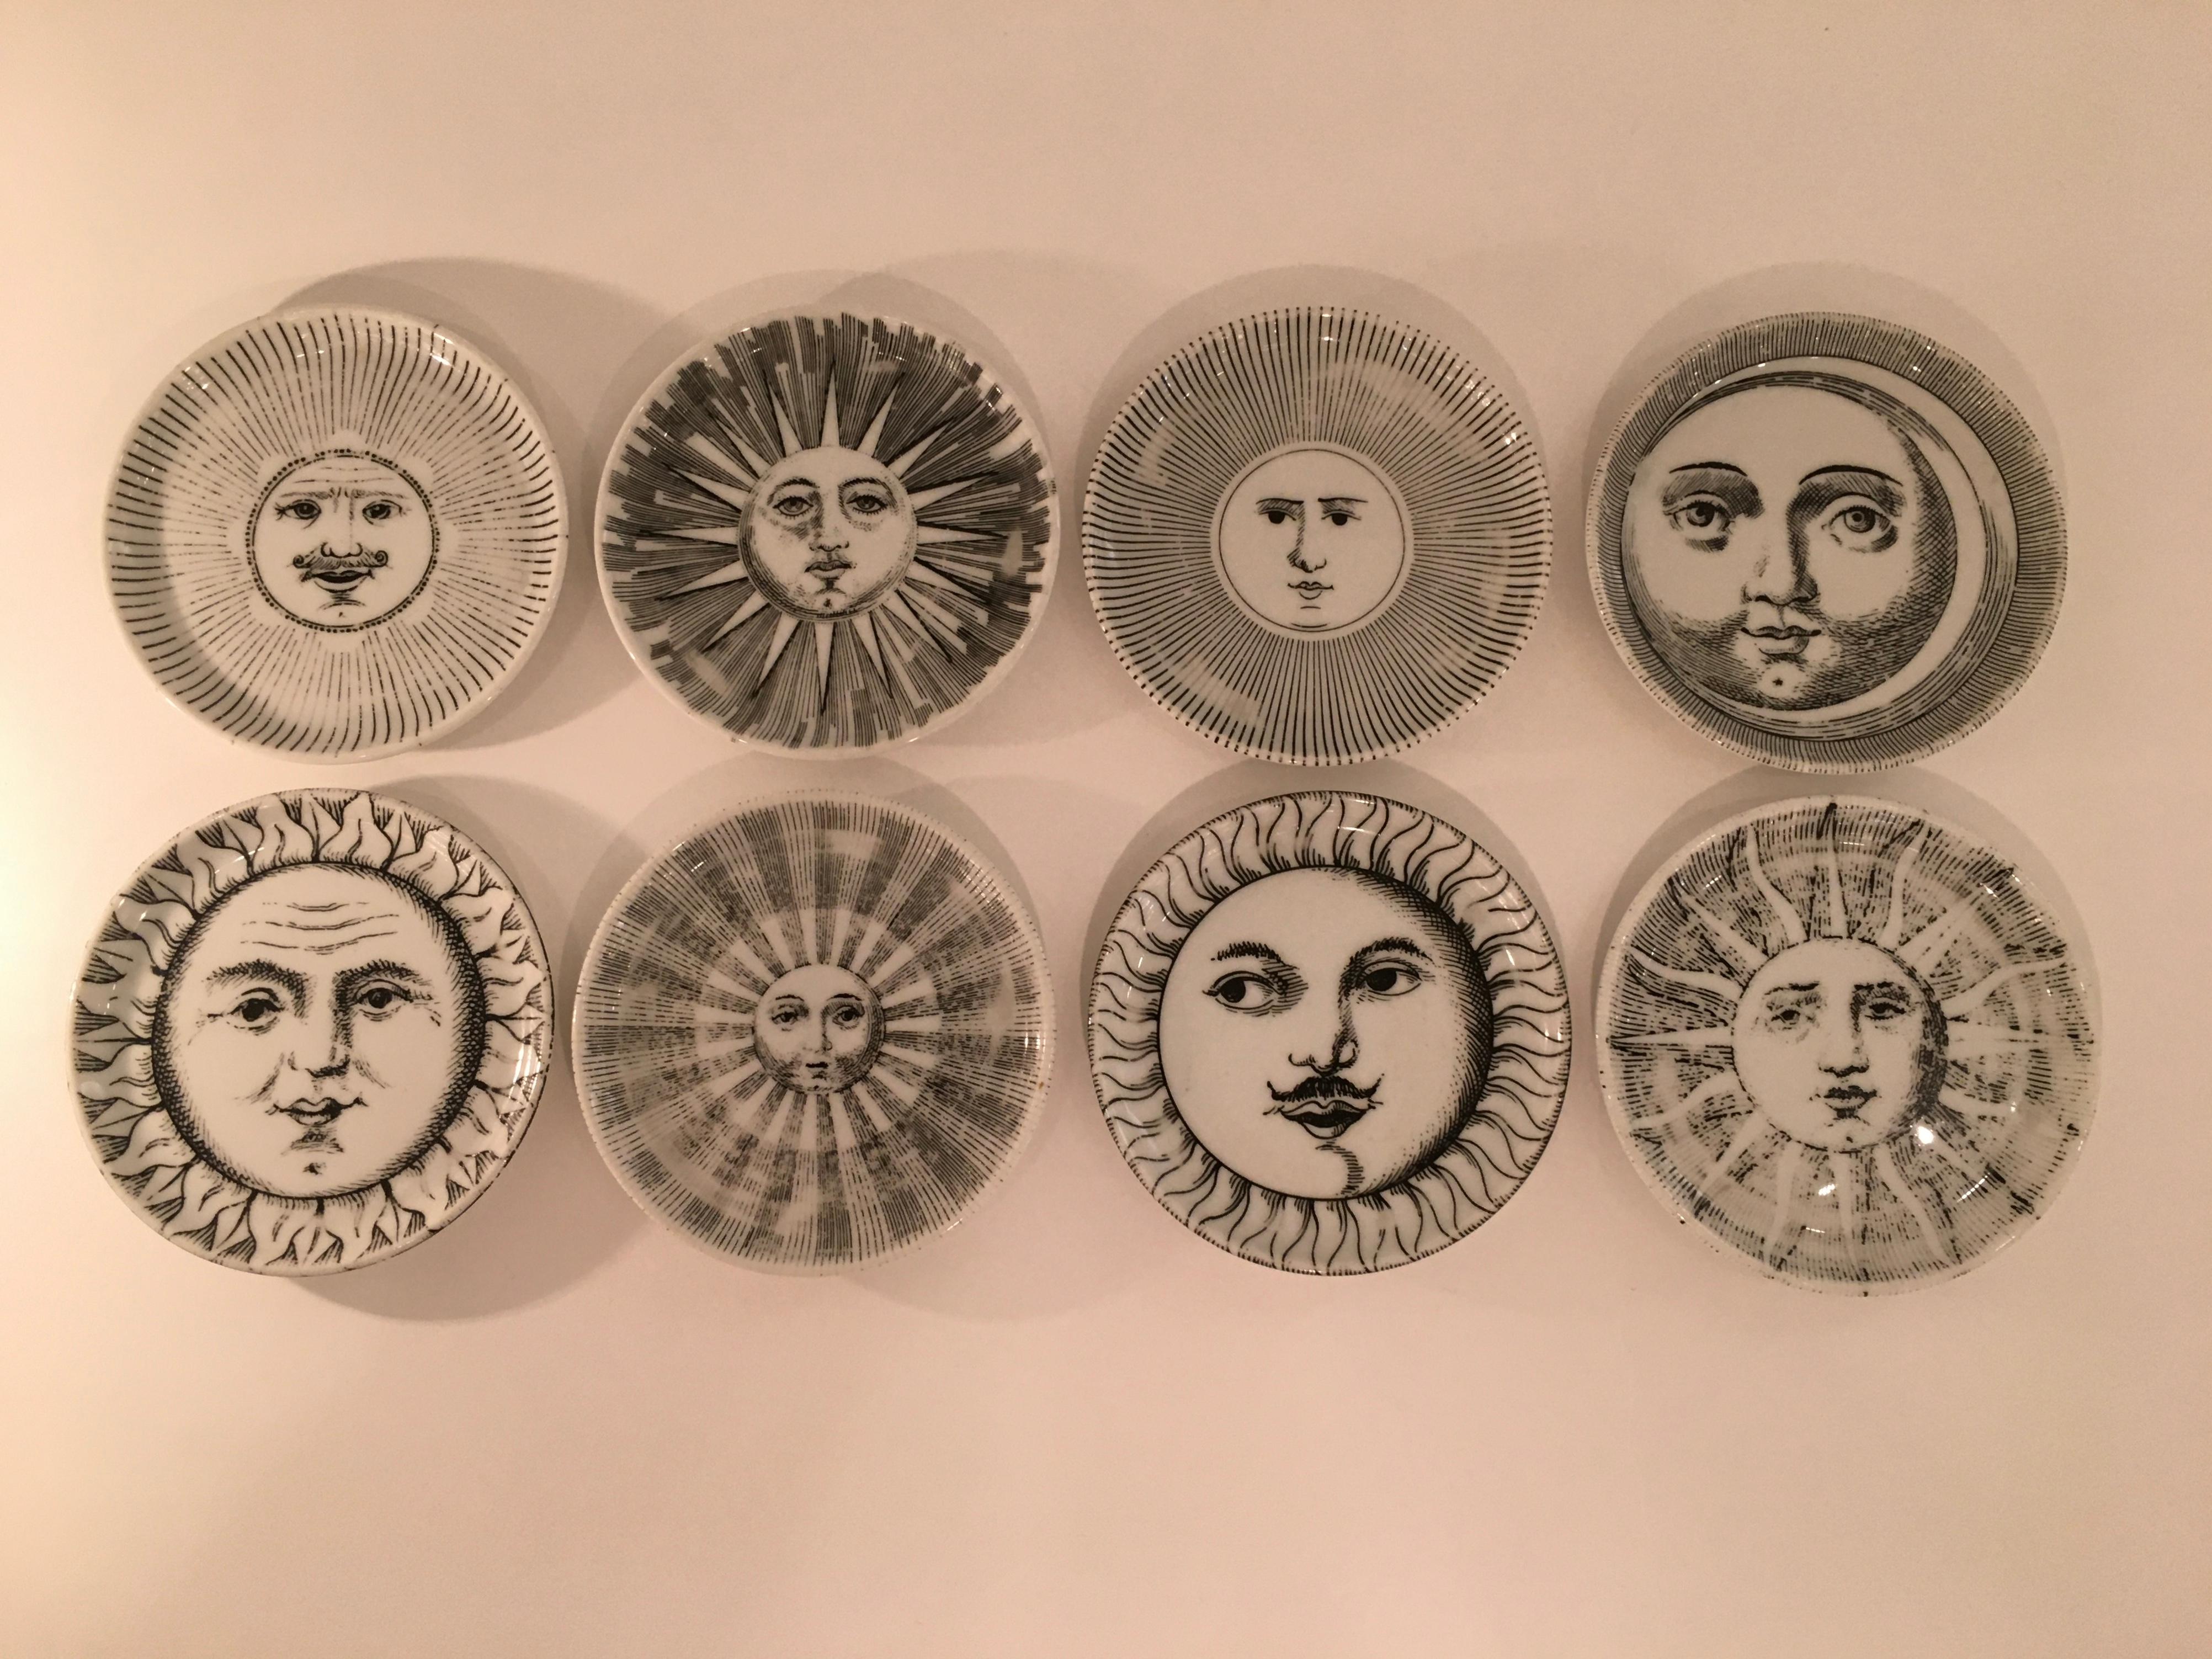 Ceramic Complete Set of Eight 'Soli e Lune' Drinks Coasters by Fornasetti, Italy